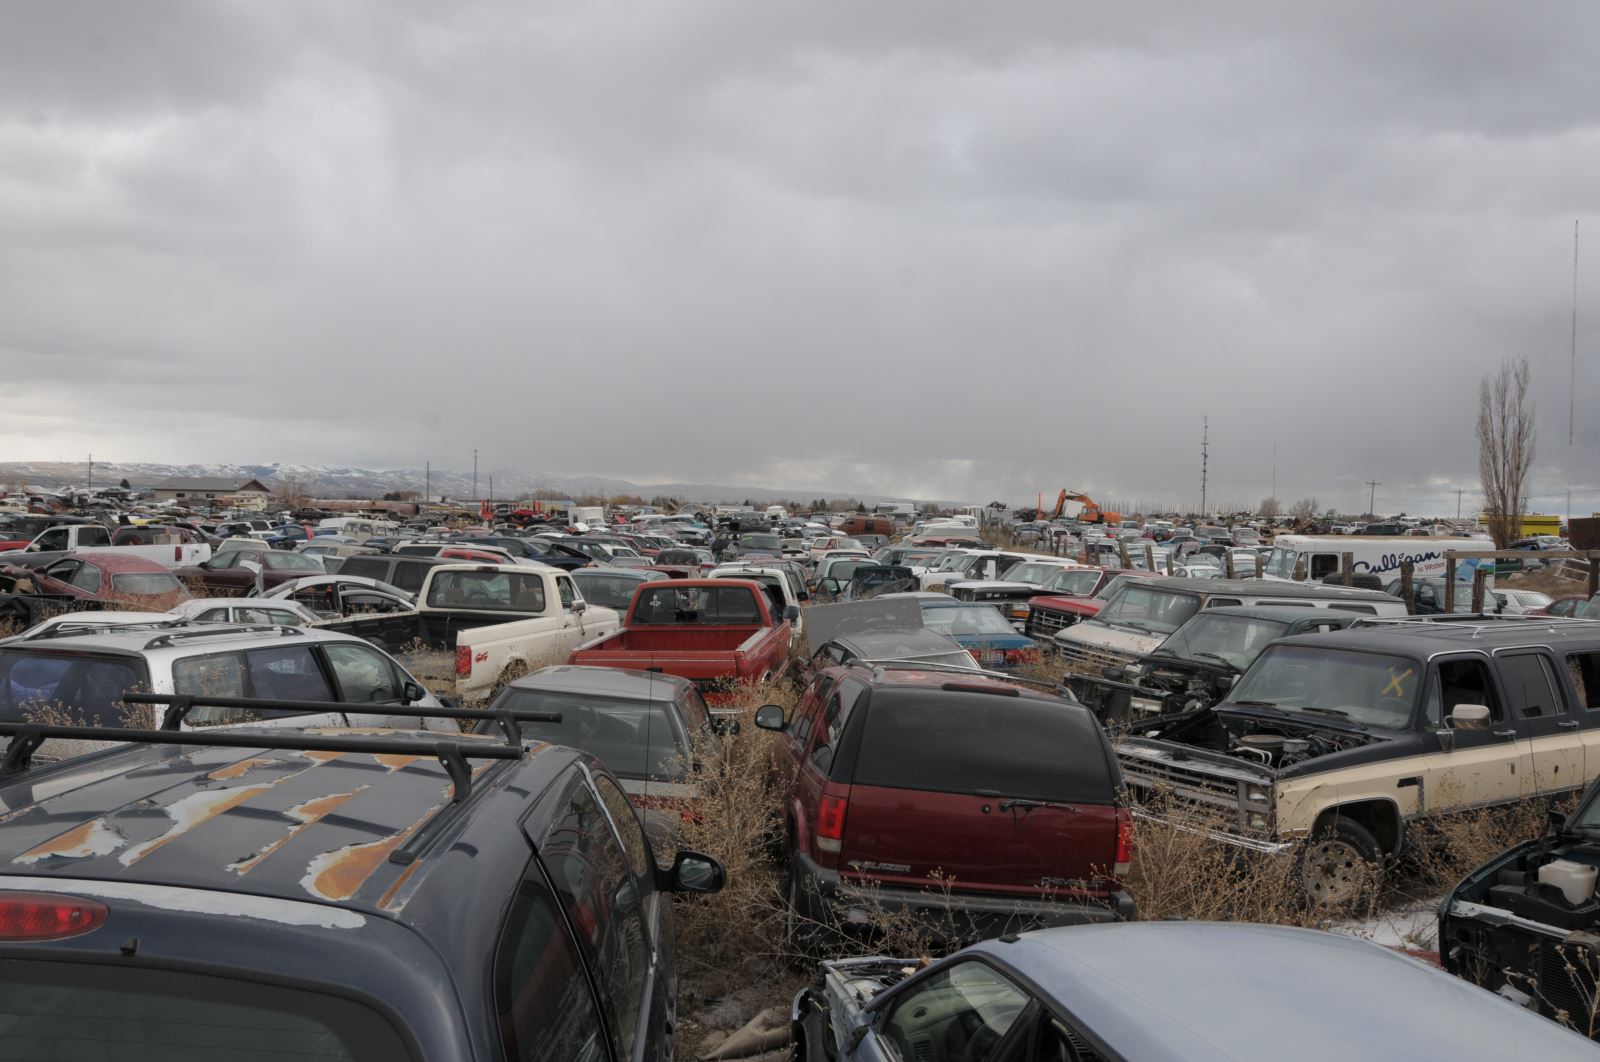 3193 1600 - Auto Salvage Yards - Compared To Spurious Parts